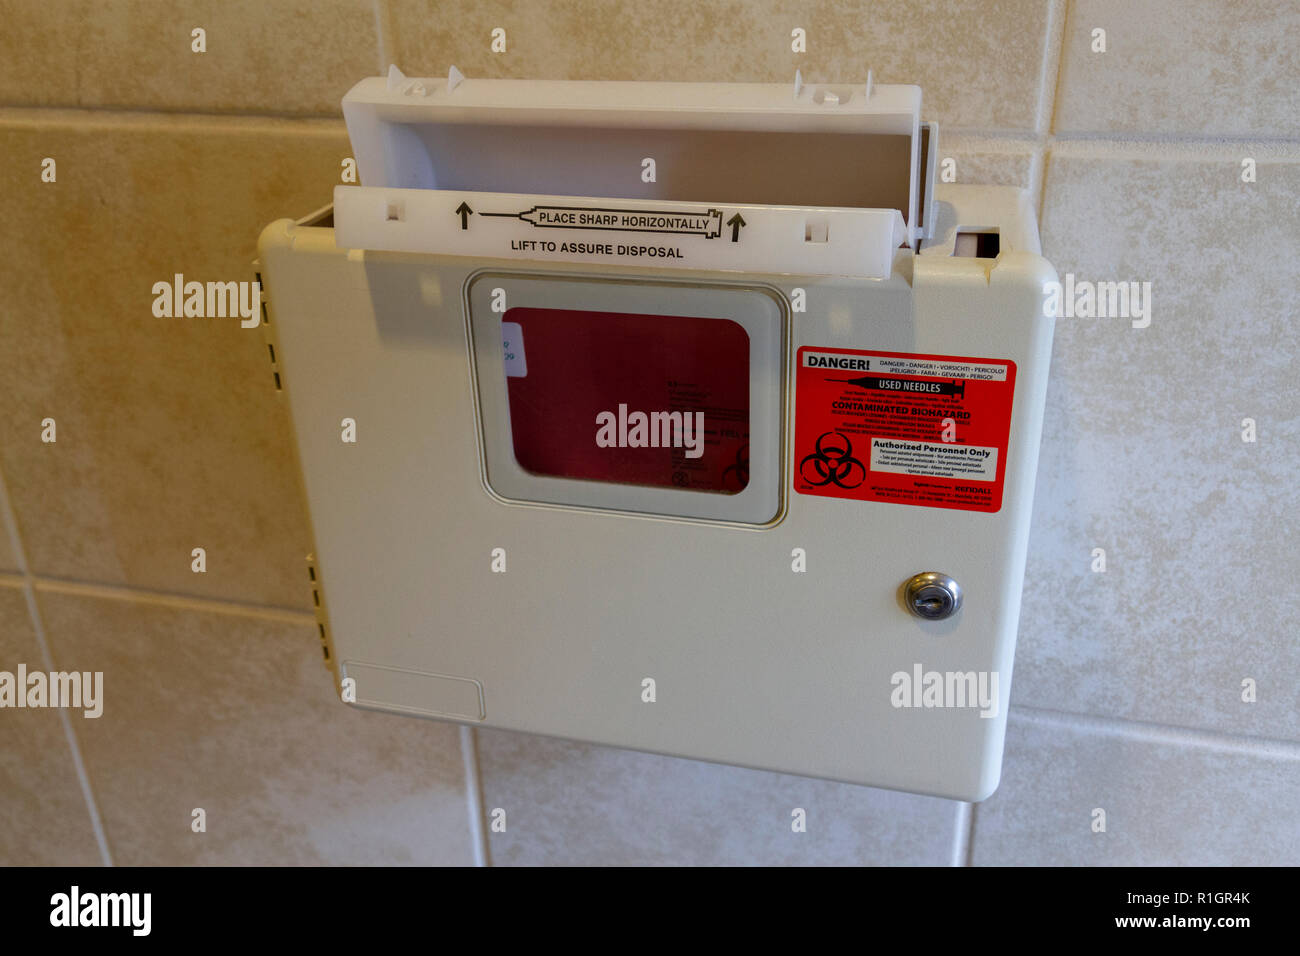 A used hypodermic needle/sharps disposal box in SeaWorld San Diego, California, United States. Stock Photo